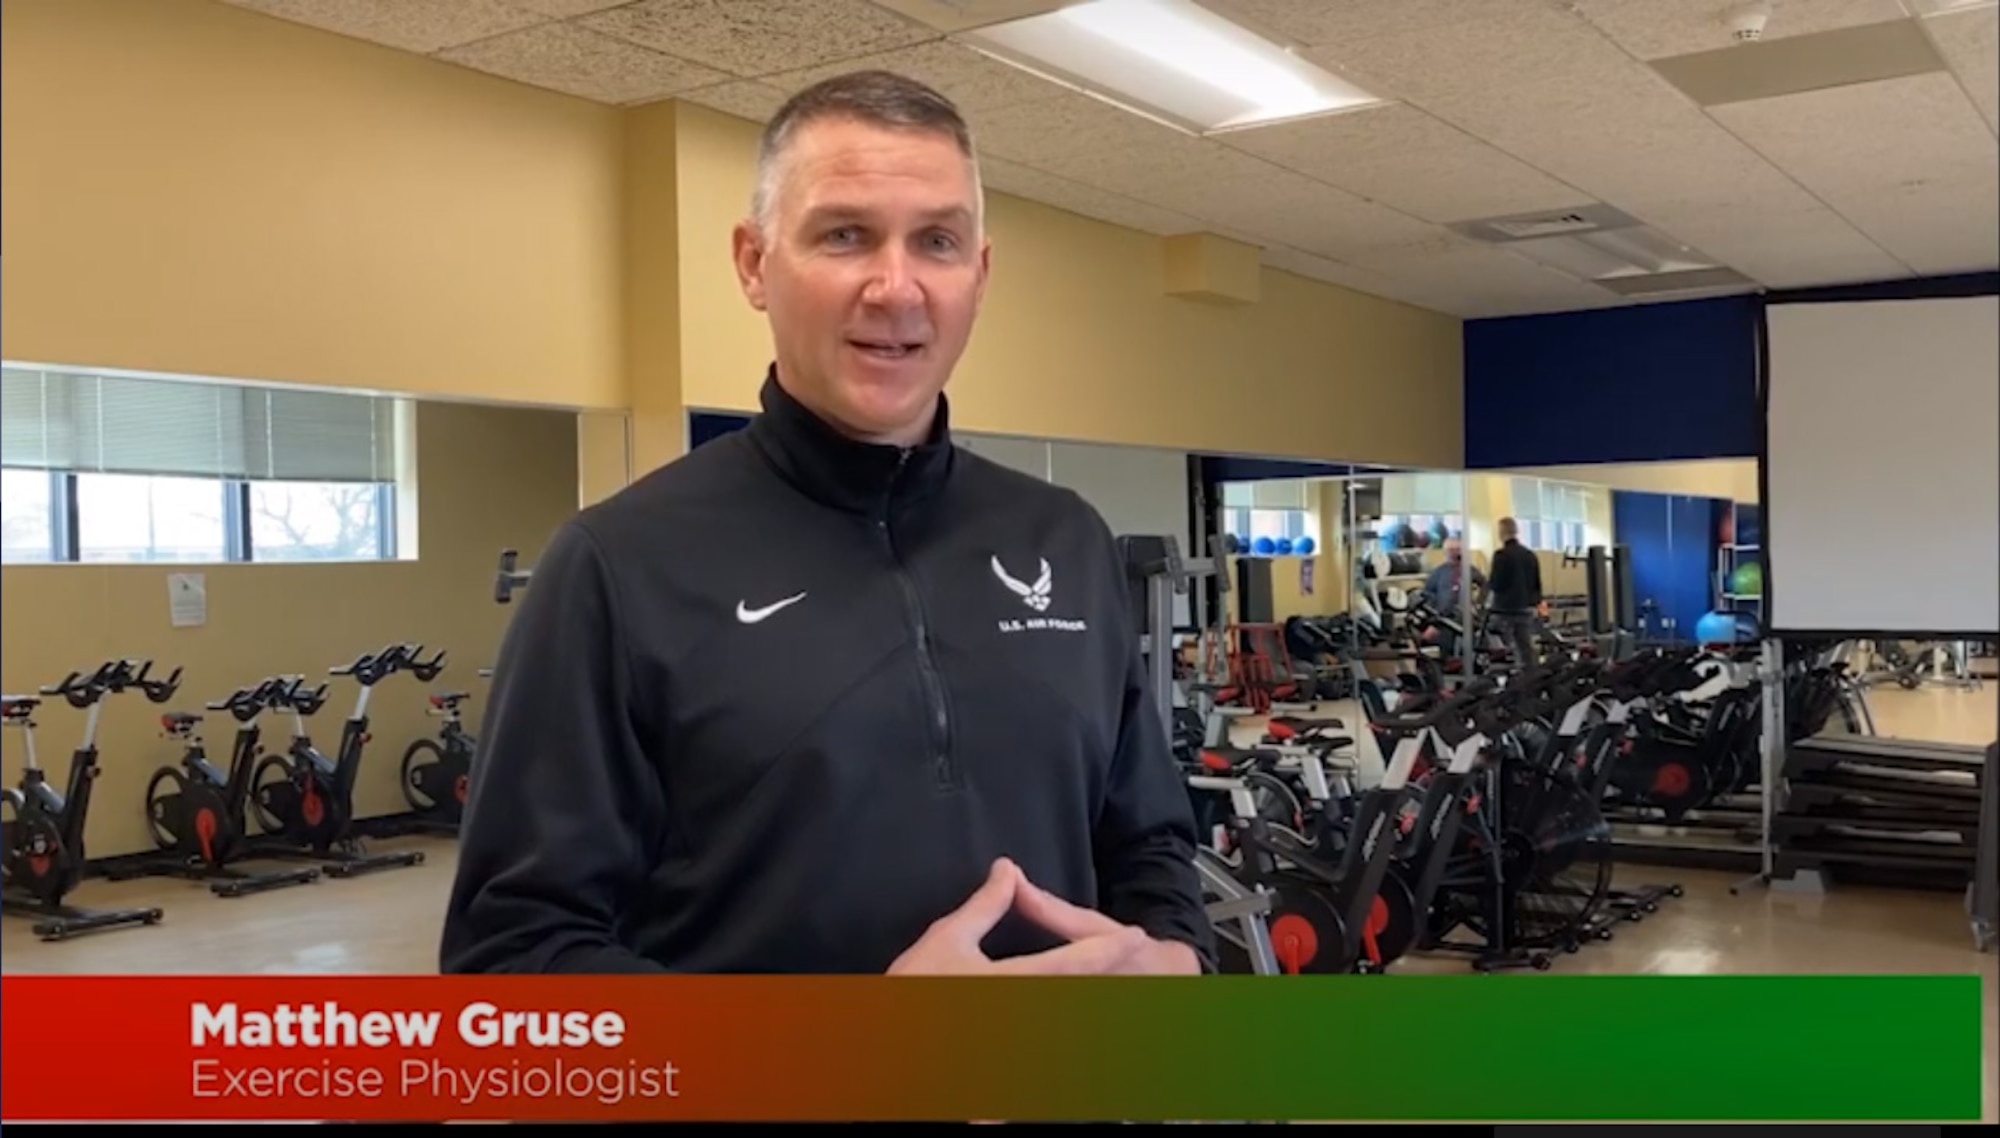 New Fitness Options with Matthew Gruse